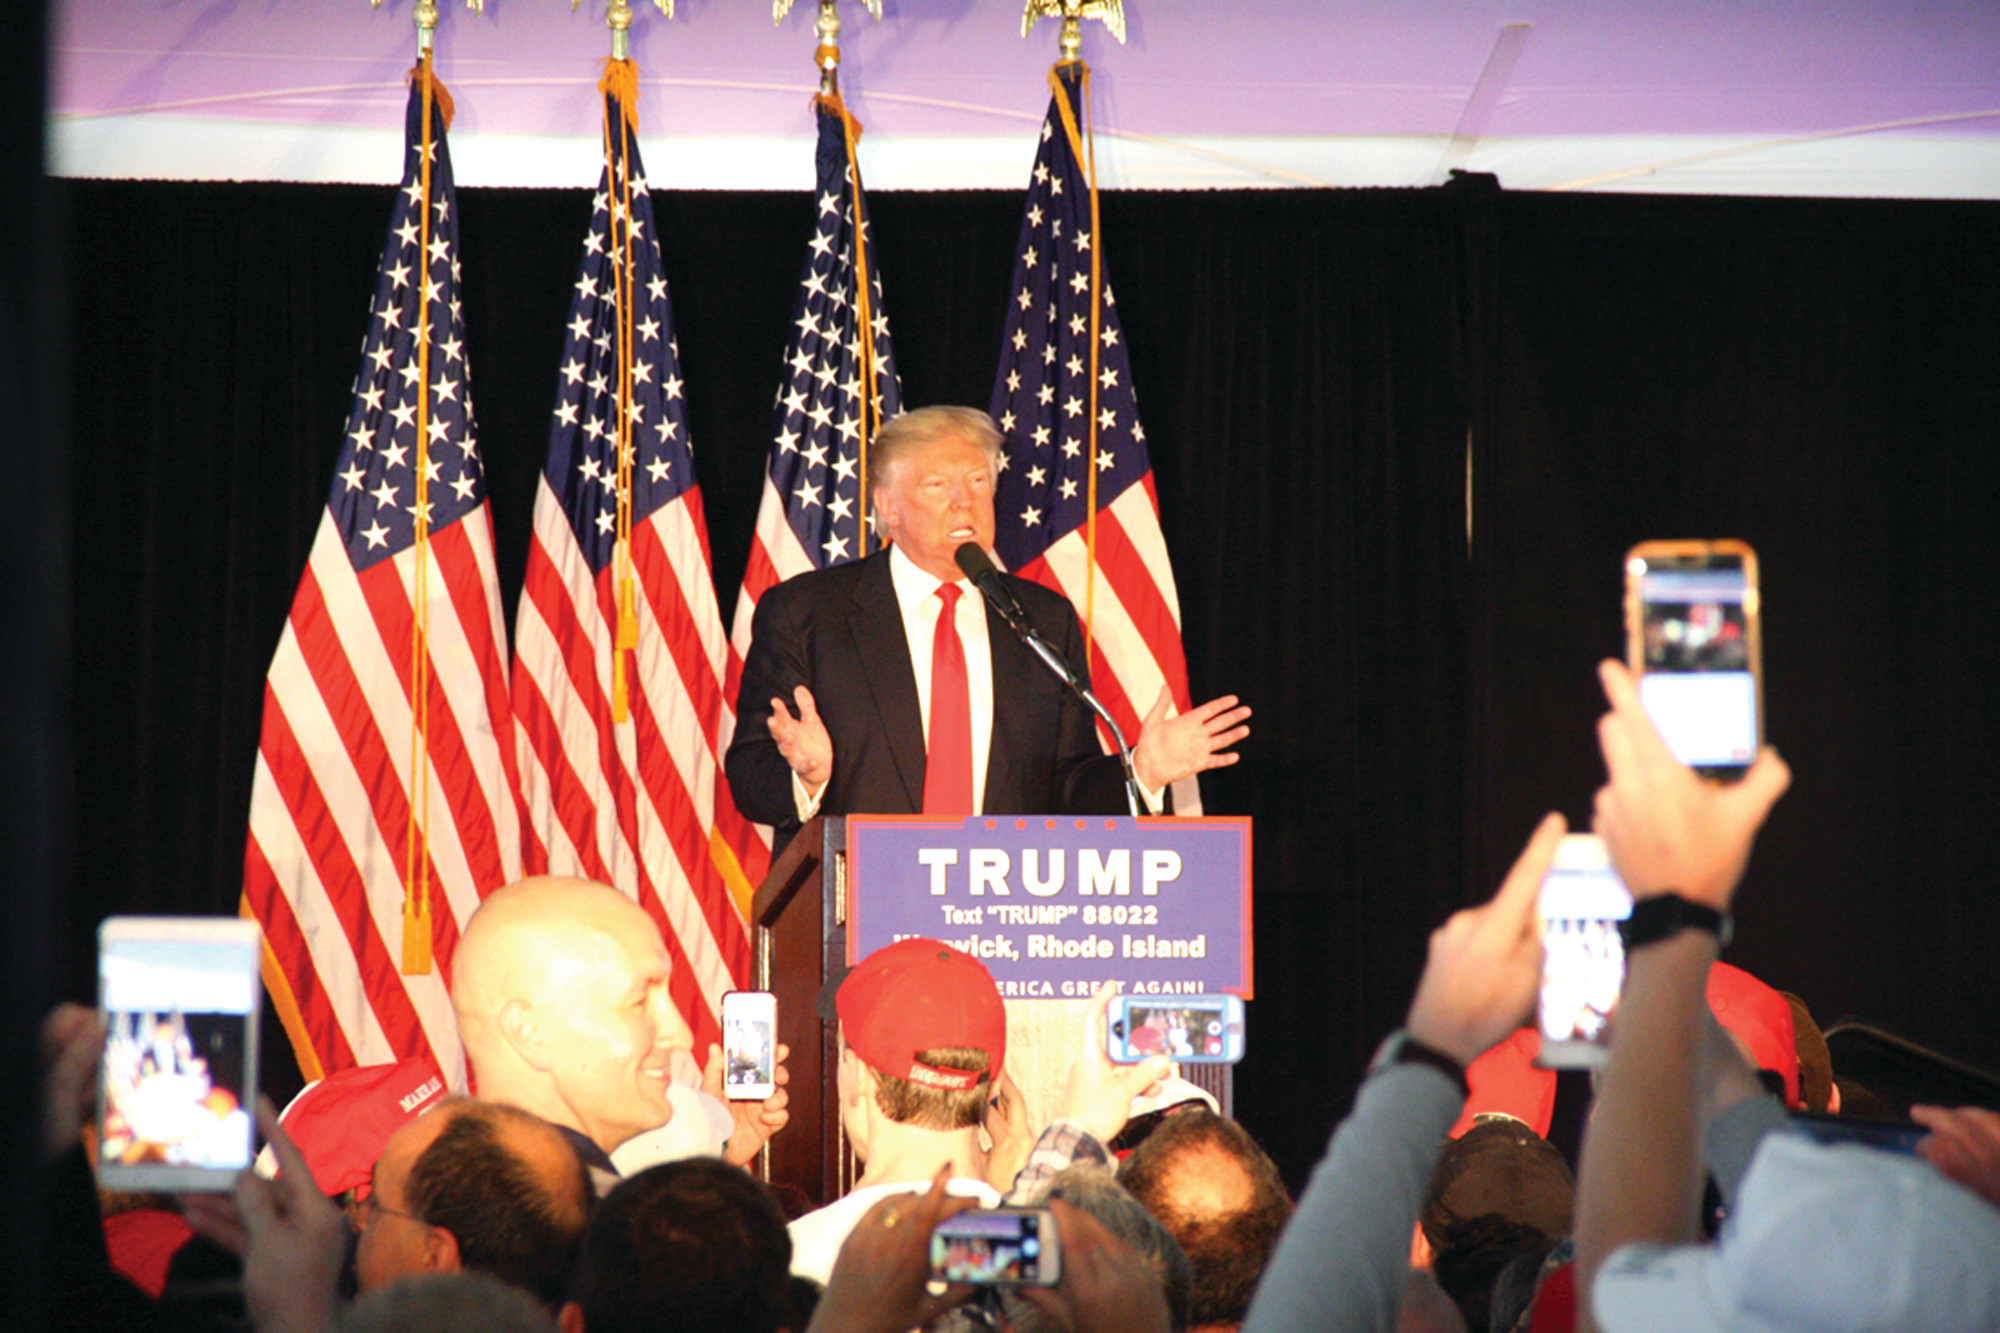 BOSS’ APPEAL: In this file photo, Donald Trump speaks to supporters during an April 2016 campaign stop in Warwick.
The authors of “Trump’s Democrats” believe Trump’s appeal in communities like Johnston may be tied to the
tradition of machine politics, led by a “boss” at the top.